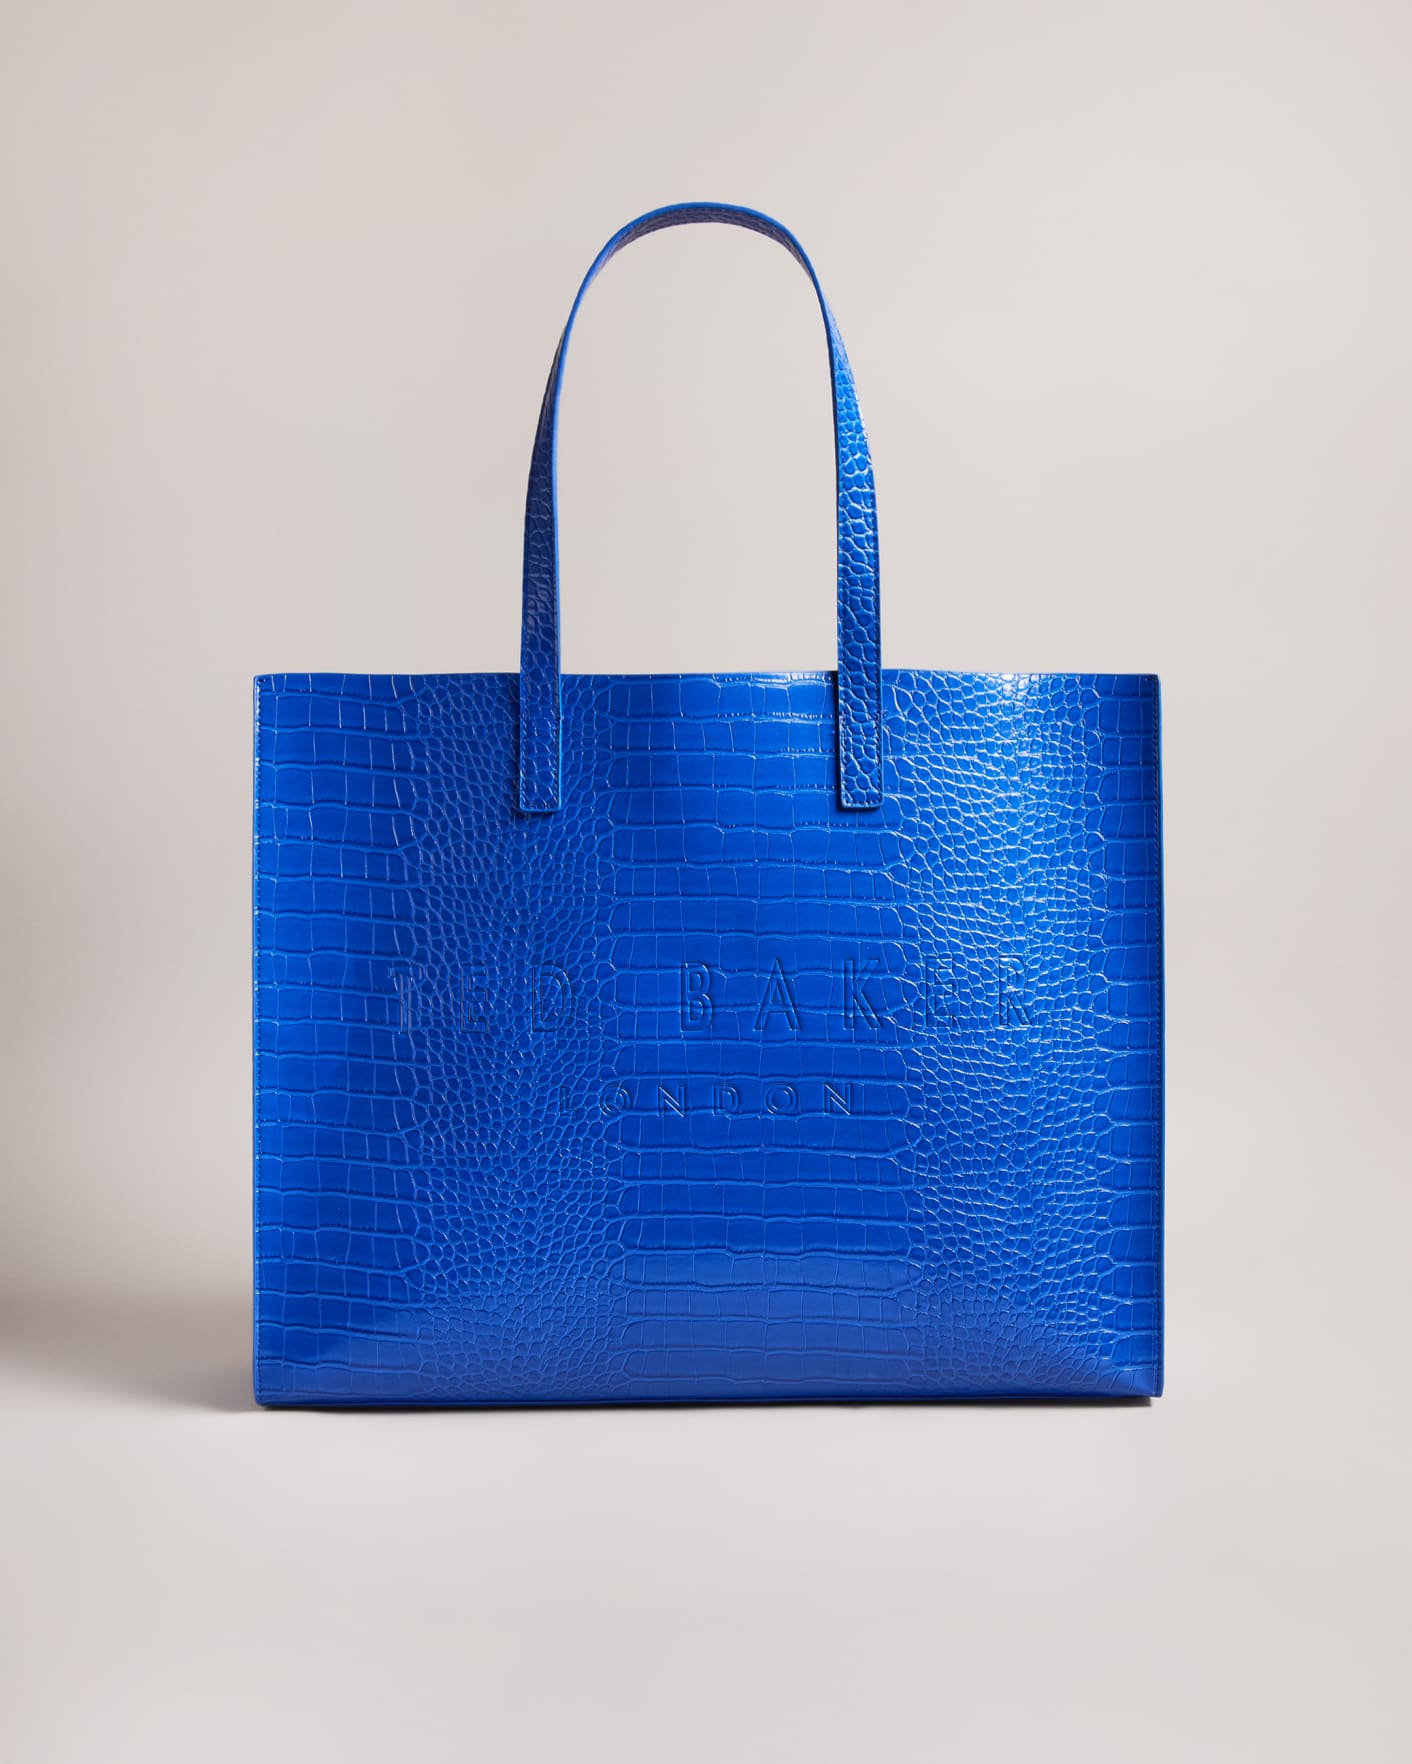 Women Blue Croc-Skin Patterned Small Tote Bag